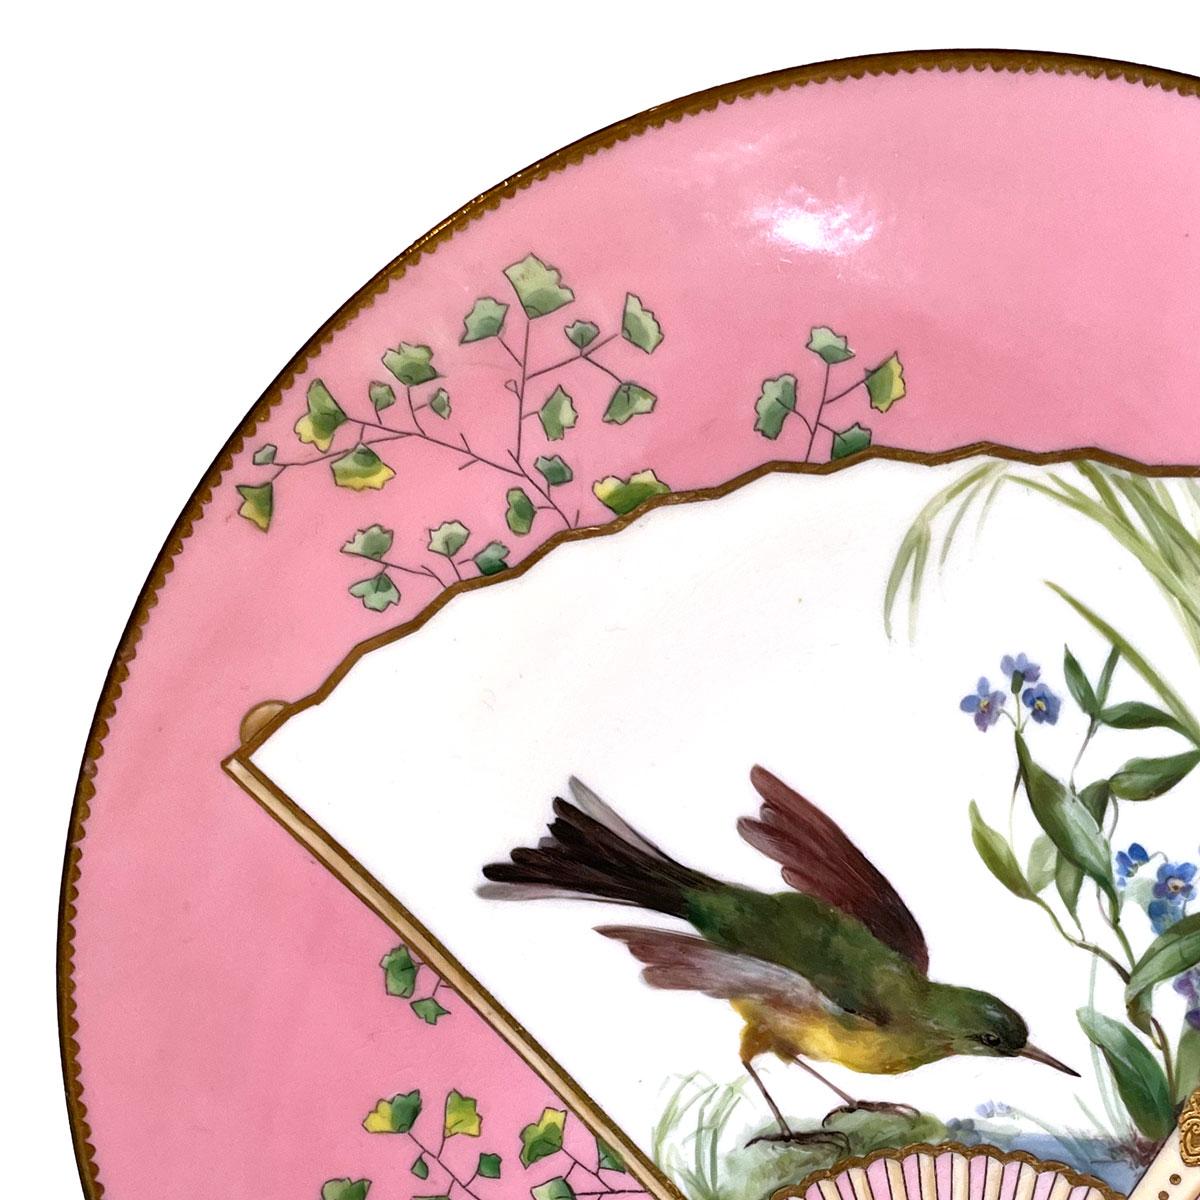 Pink Aesthetic Minton Porcelain plate in the style of Japonism creations made by Christopher Dresser. Round plate adorned with an oriental fan representing a lovely and colorful bird. Lovely decorations, with plants and oriental items.
Stamped